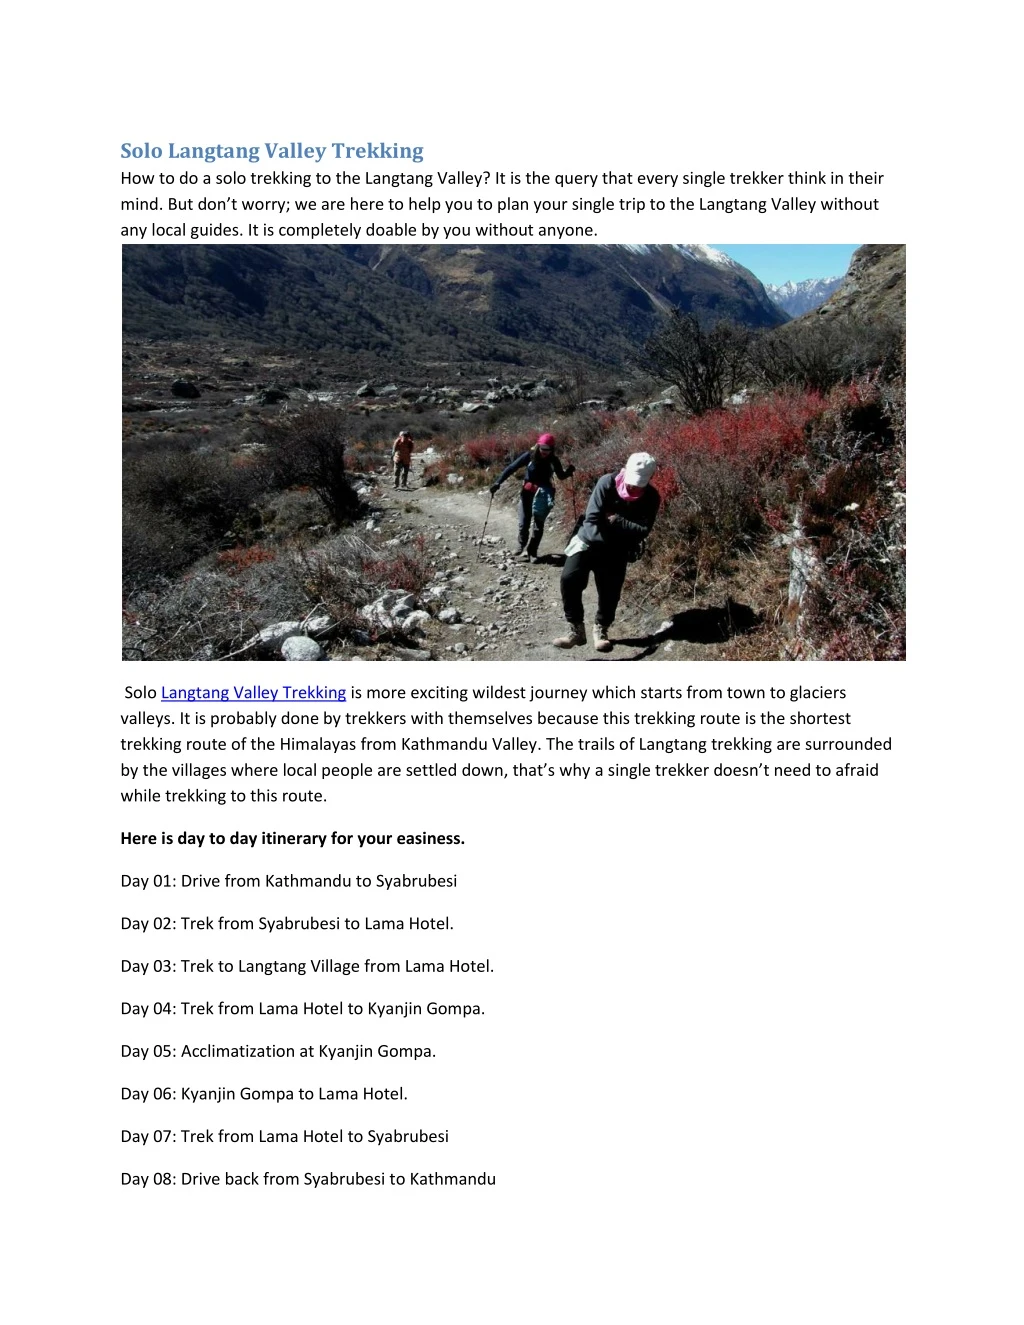 solo langtang valley trekking how to do a solo